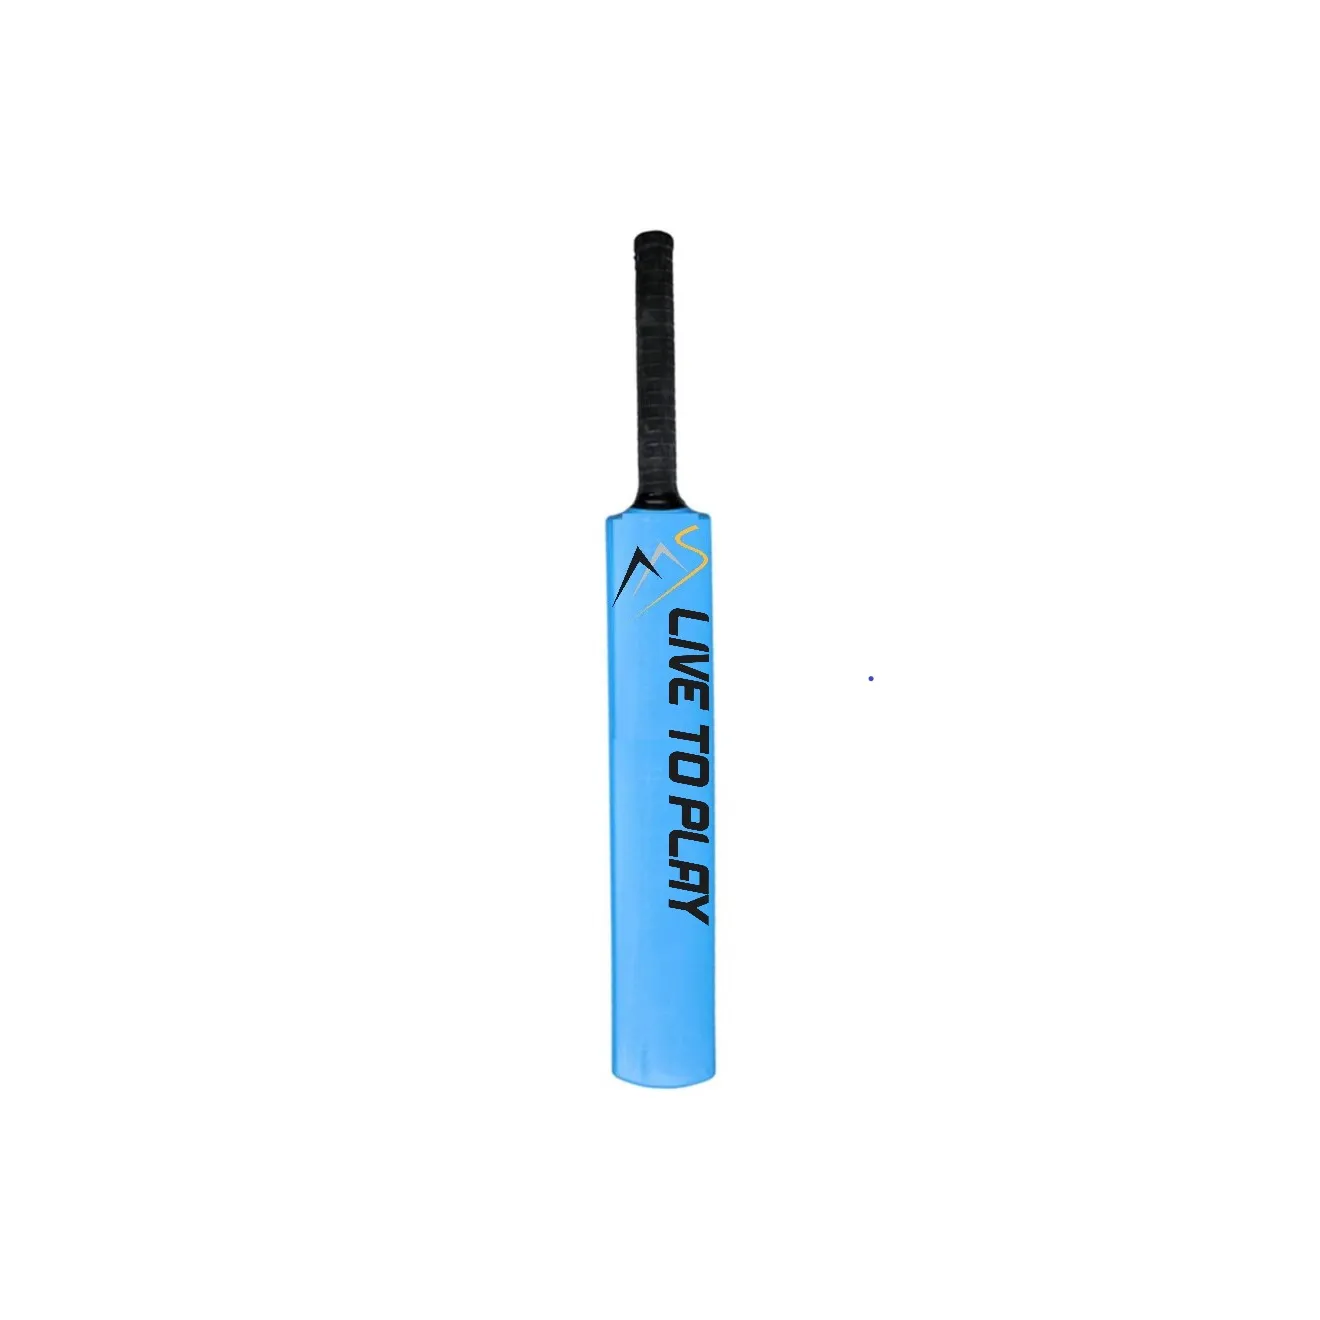 AAS Wholesale Heavy Weight Plastic Cricket Bat for Indoor and Outdoor Cricket go well with windball, tennis ball & plastic balls